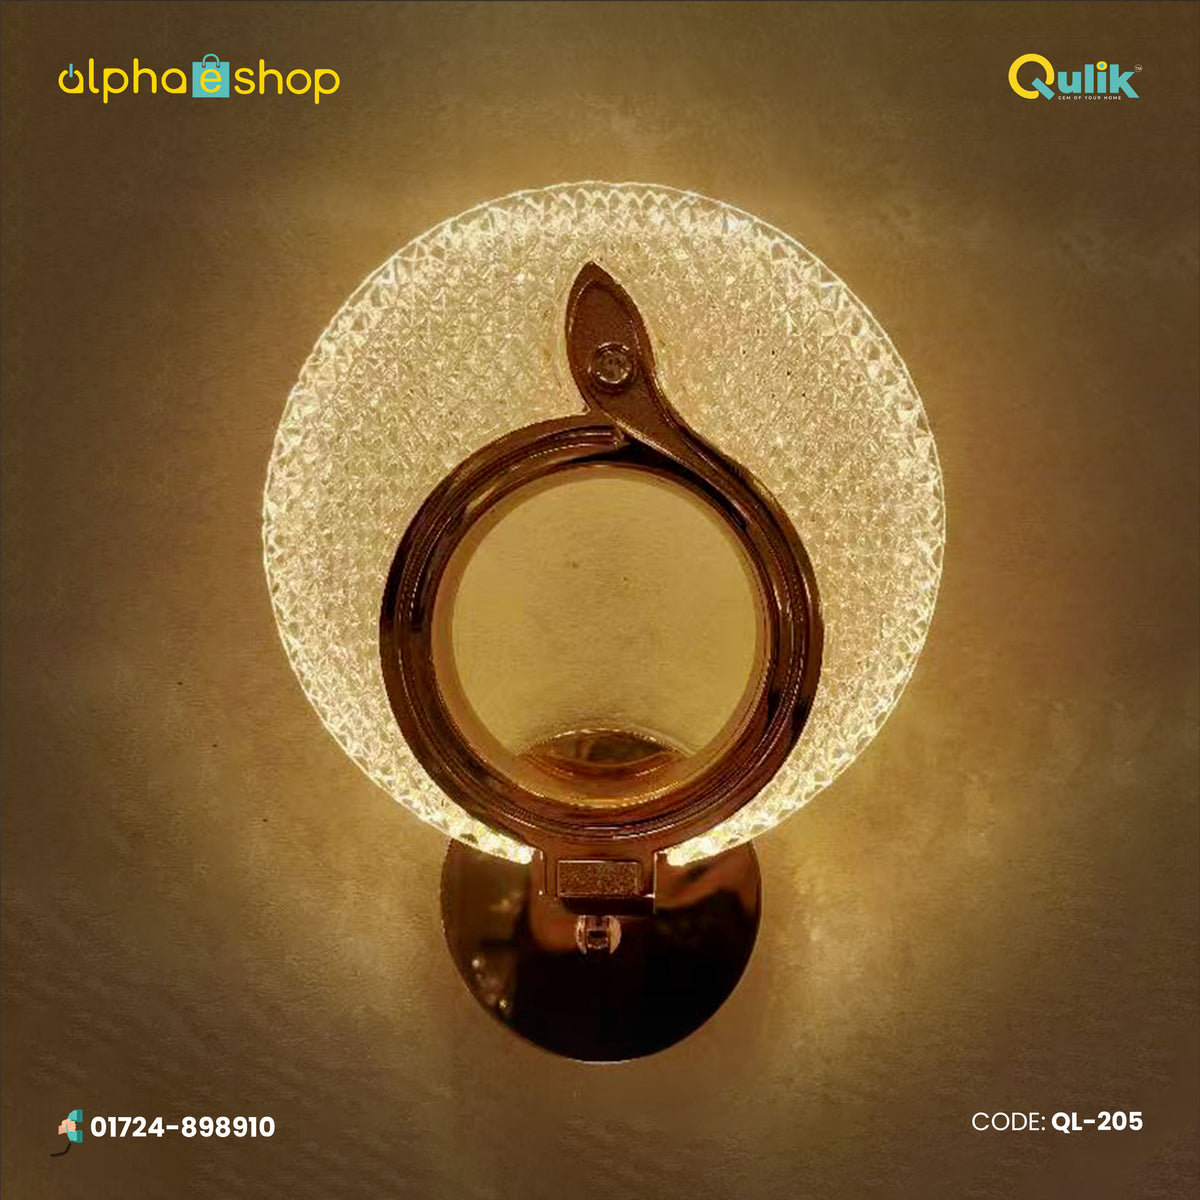 Qulik QL-205 Modern Wall Lamp - Timeless Elegance, Aluminum Body, Adjustable Lighting, 2-Year Warranty. Elevate your space with sophistication and enduring style.